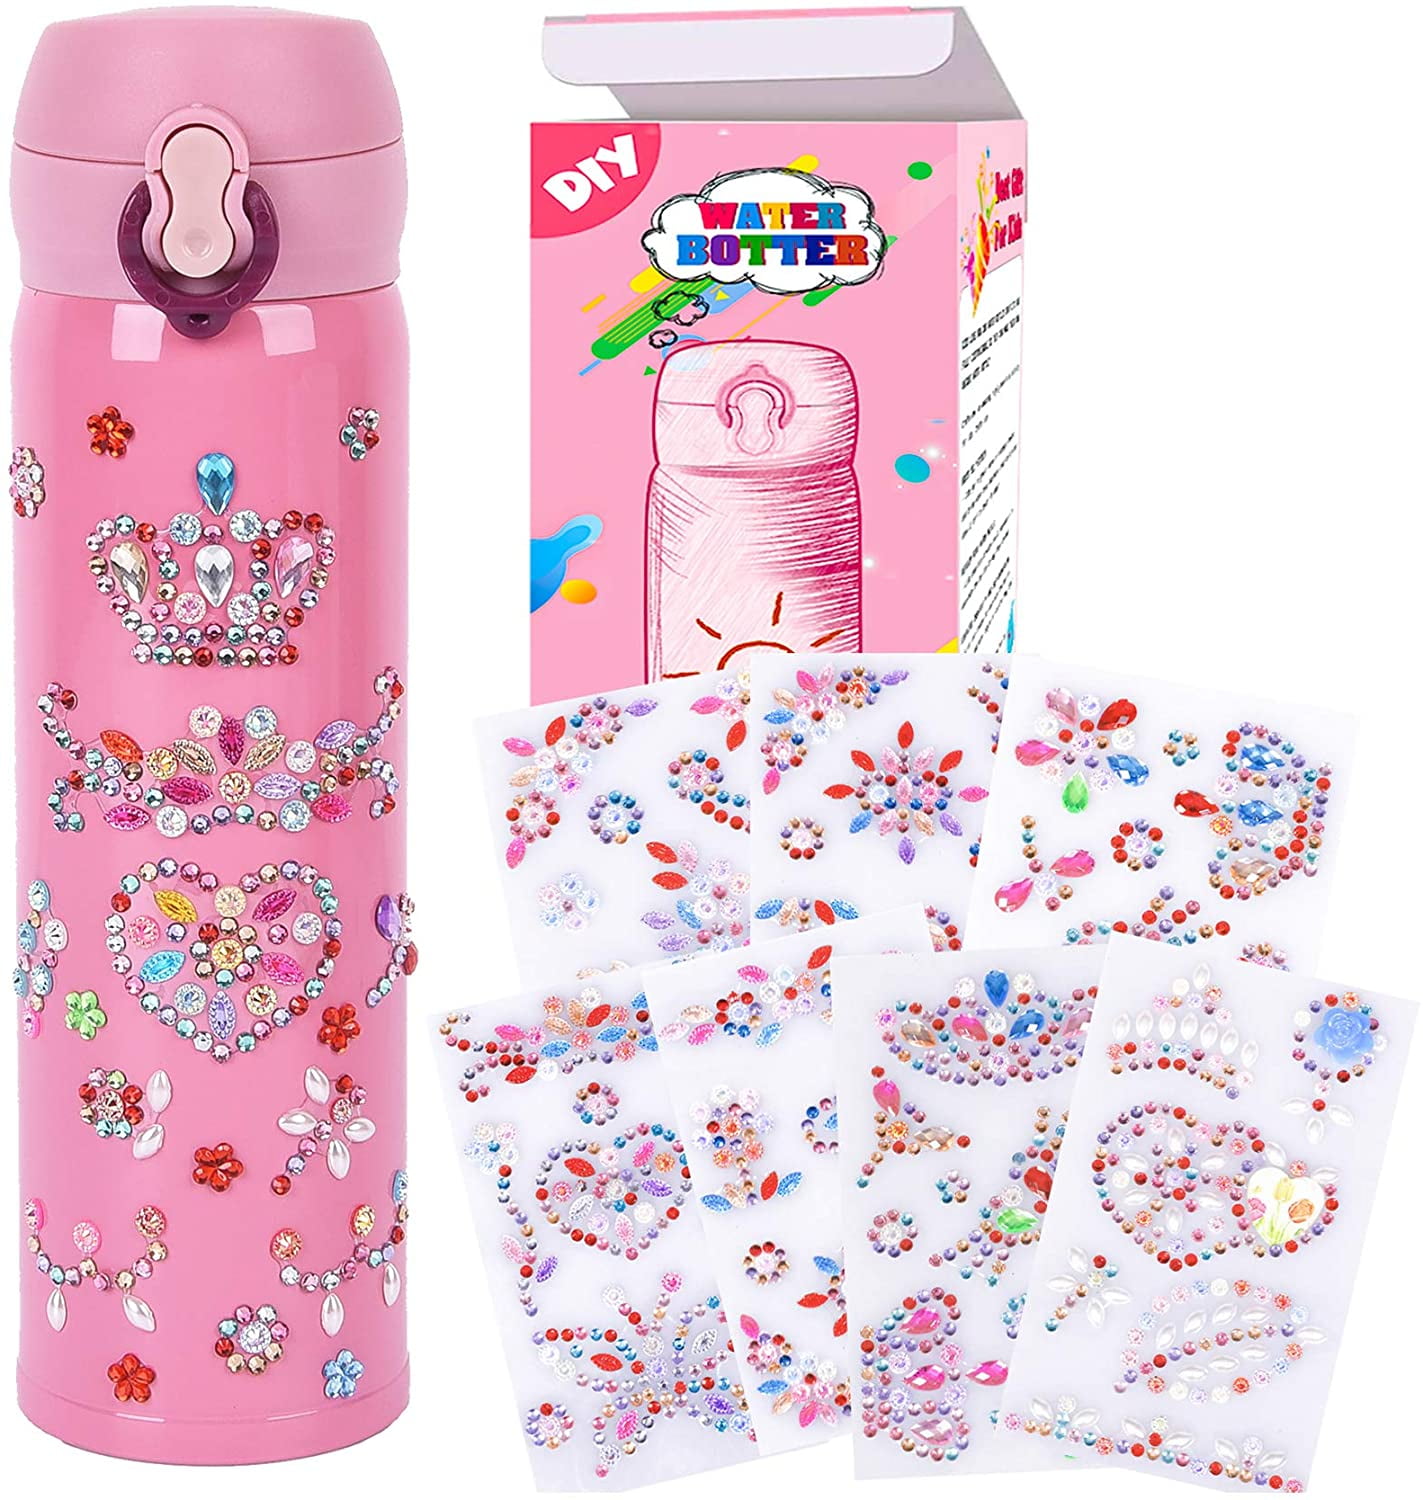 Sy Mermaid Water Bottle with Glitter Gem Stickers DIY Art & Craft Kit  Decorate Your Own Water Bottles for Girls - China DIY Creative Toy Water  Bottles and DIY Art & Craft